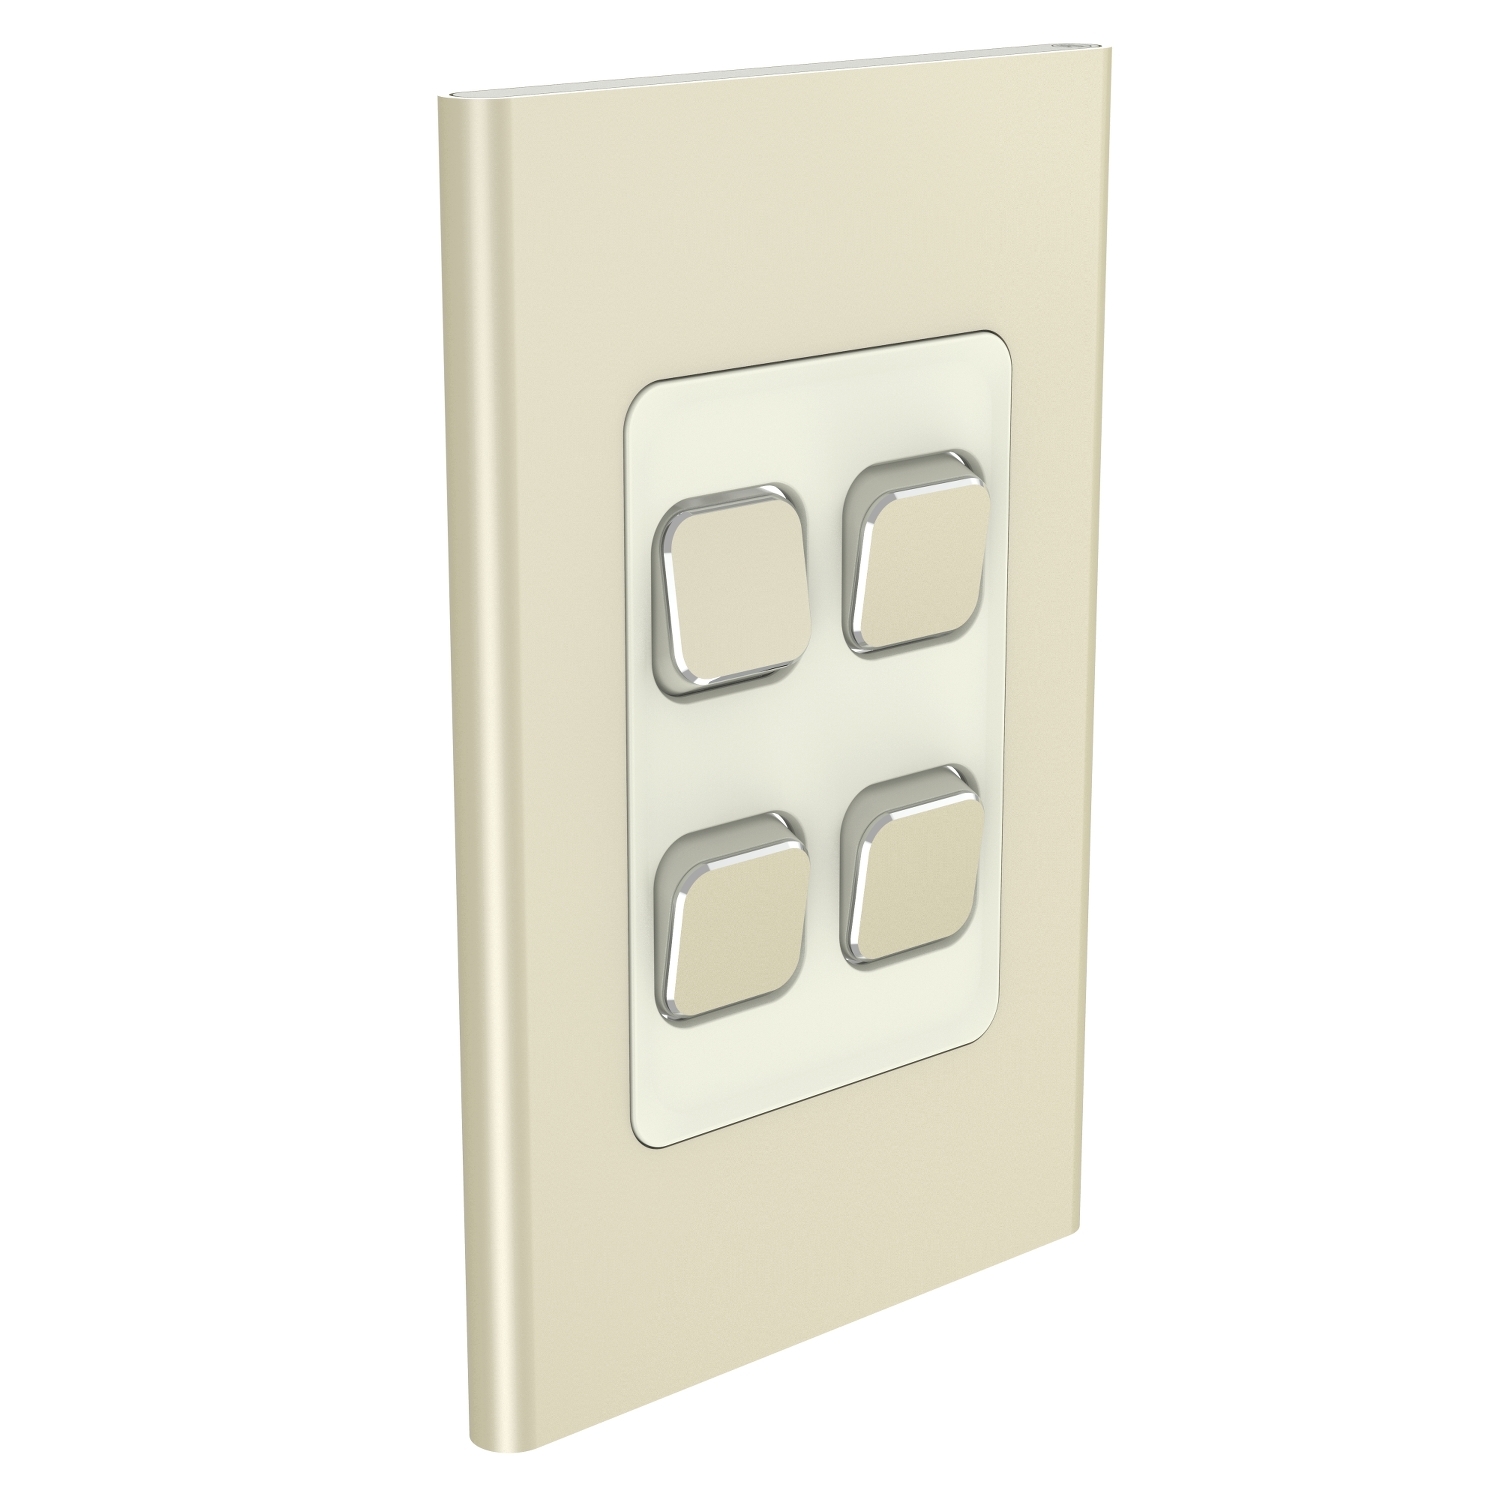 PDL Iconic Styl, cover frame, 4 switches, vertical - Crowne